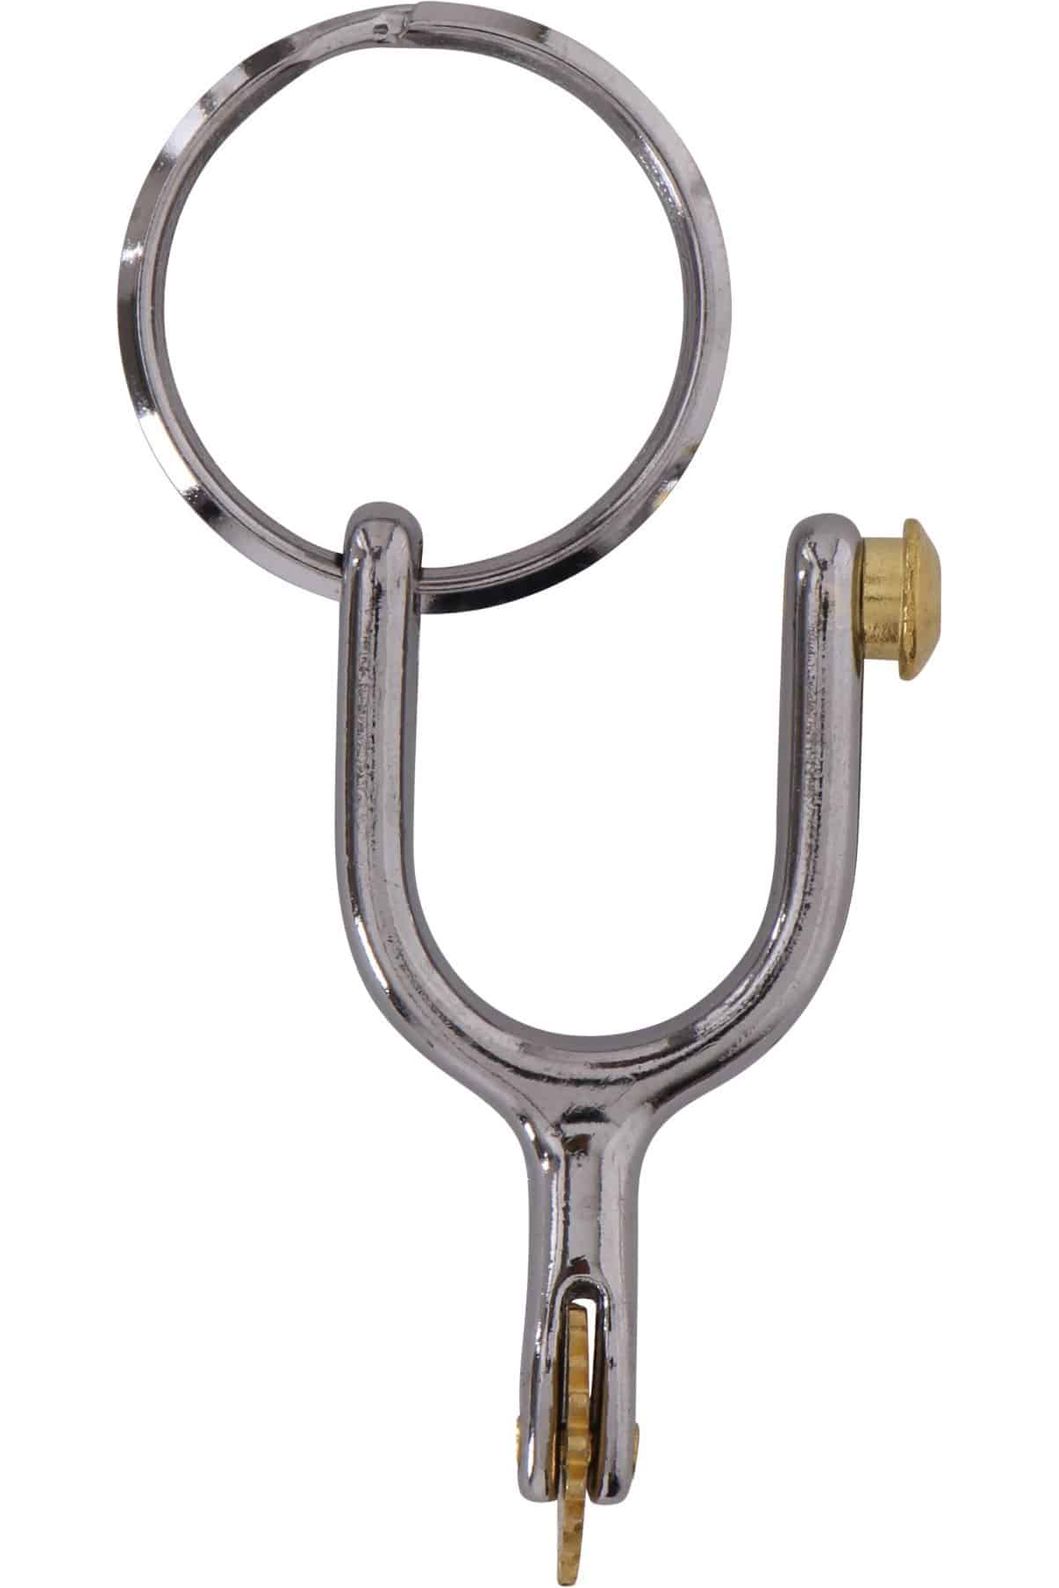 Key Ring - Spur with Rowel Rider Accessories - Stocks/Ties/Hairnets/Spurs etc 